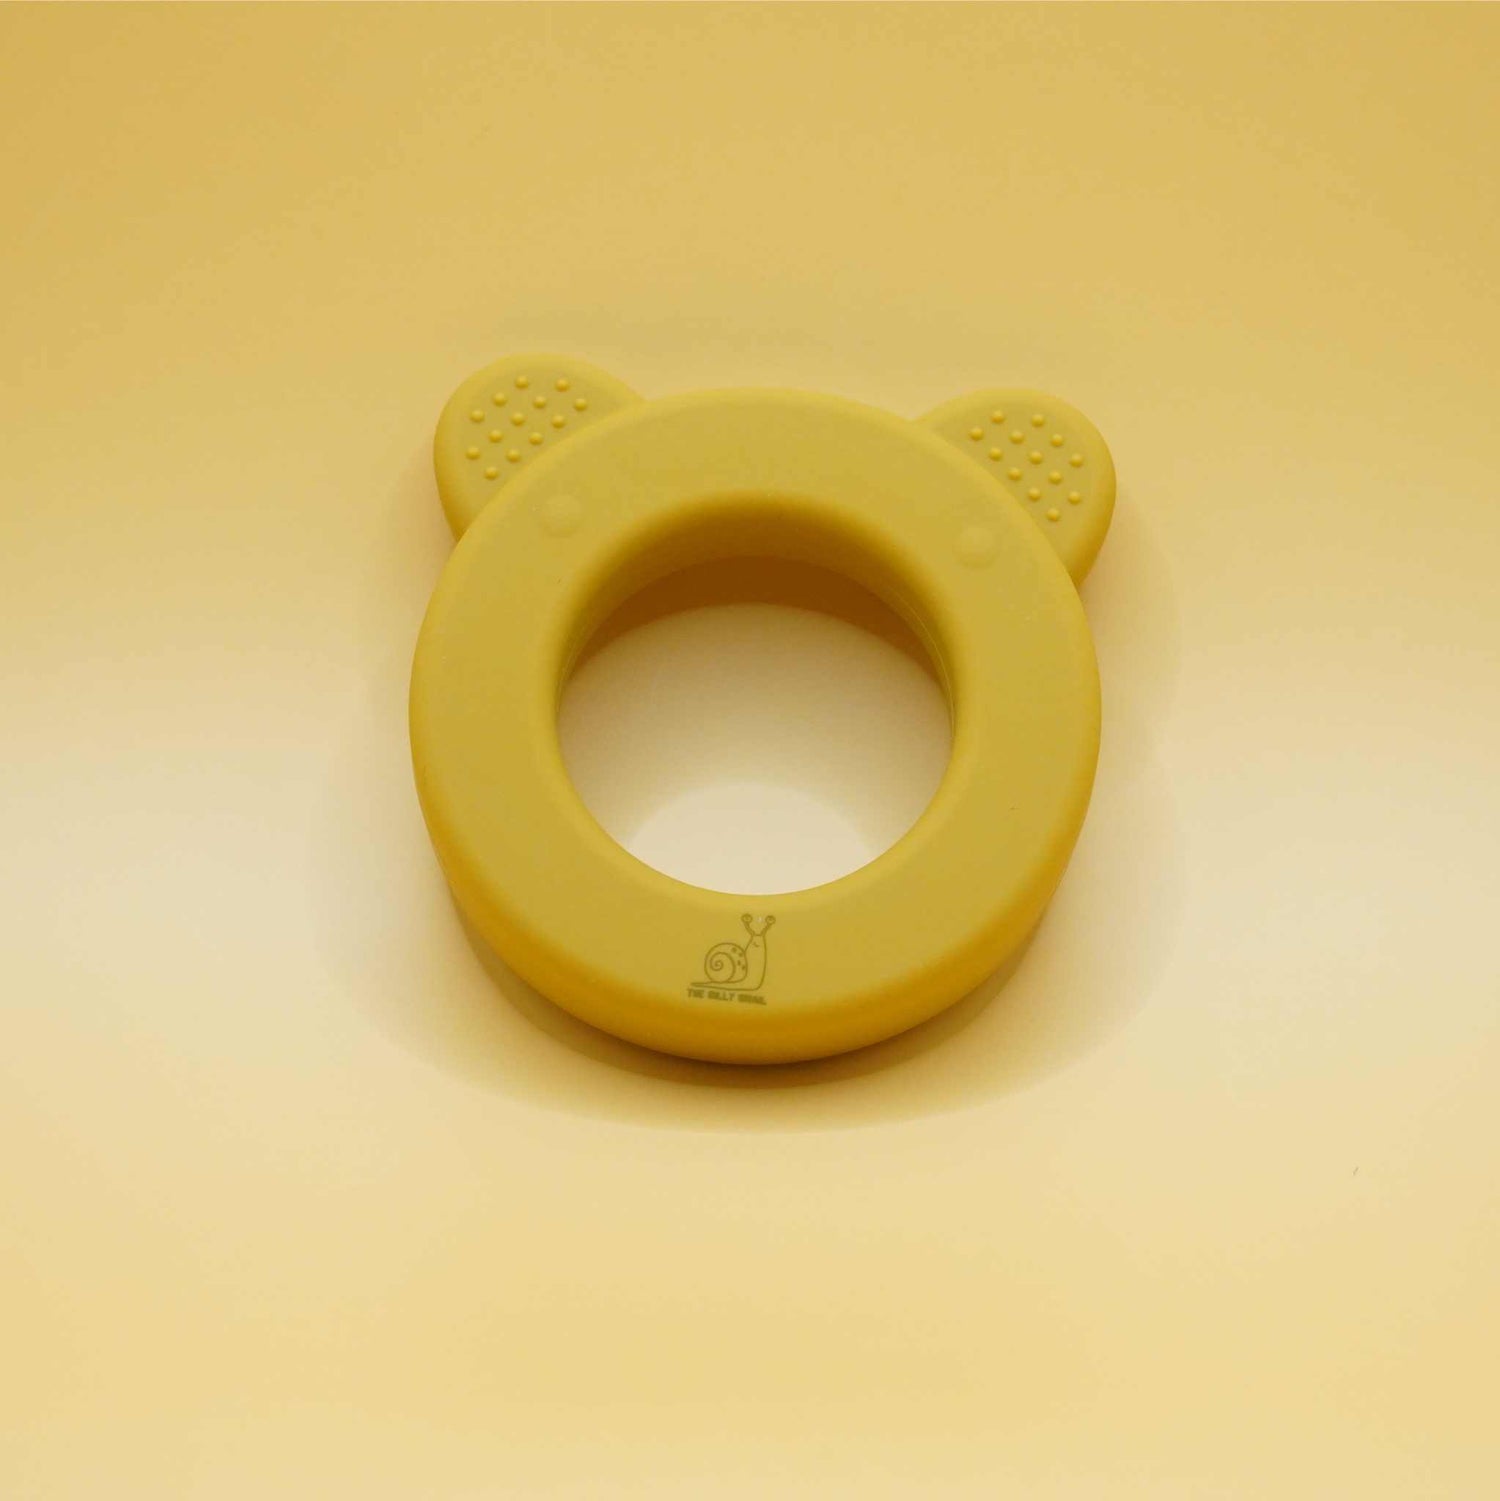 Boisterous bear shaped teething ring that rattles for babies